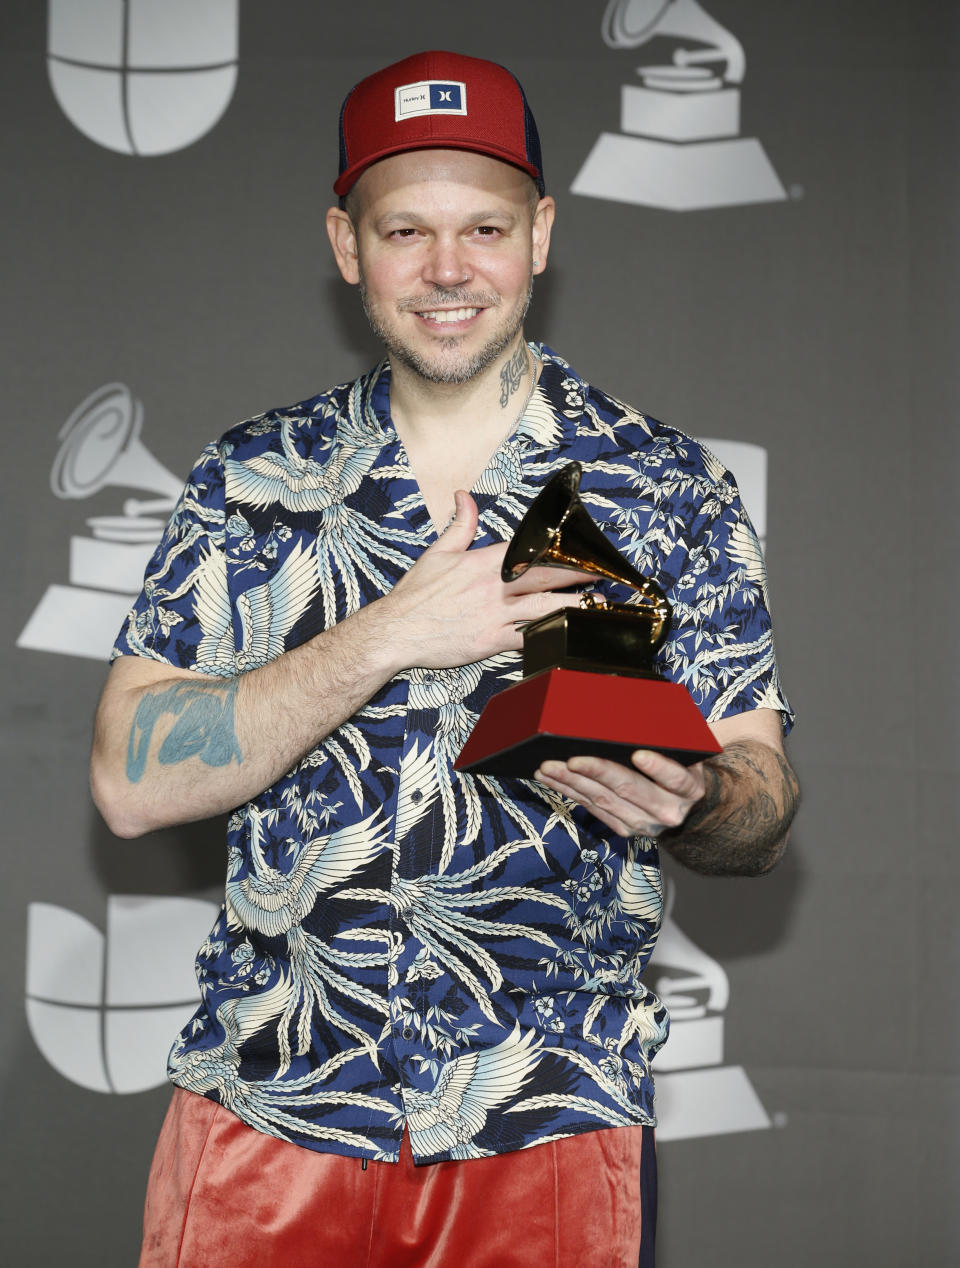 Residente poses in the press room with the award for best short form music video for "Banana Papaya" at the 20th Latin Grammy Awards on Thursday, Nov. 14, 2019, at the MGM Grand Garden Arena in Las Vegas. (Photo by Eric Jamison/Invision/AP)